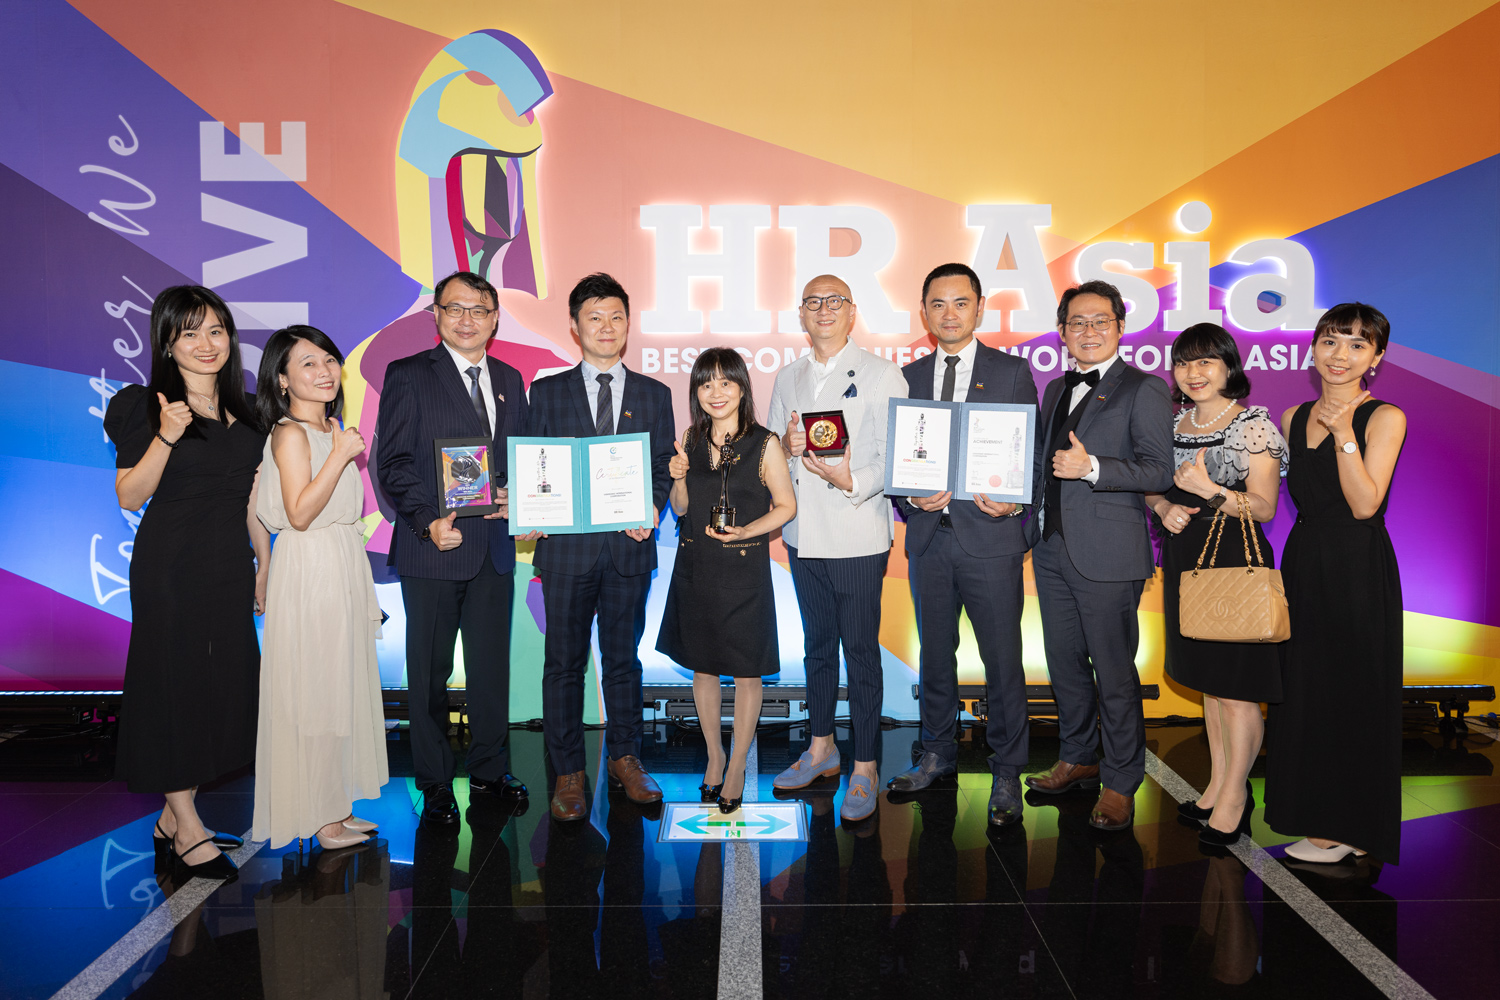 ViewSonic received HR Asia’s Best Companies To Work For In Asia and Digital Transformation Awards, standing out among numerous participants.